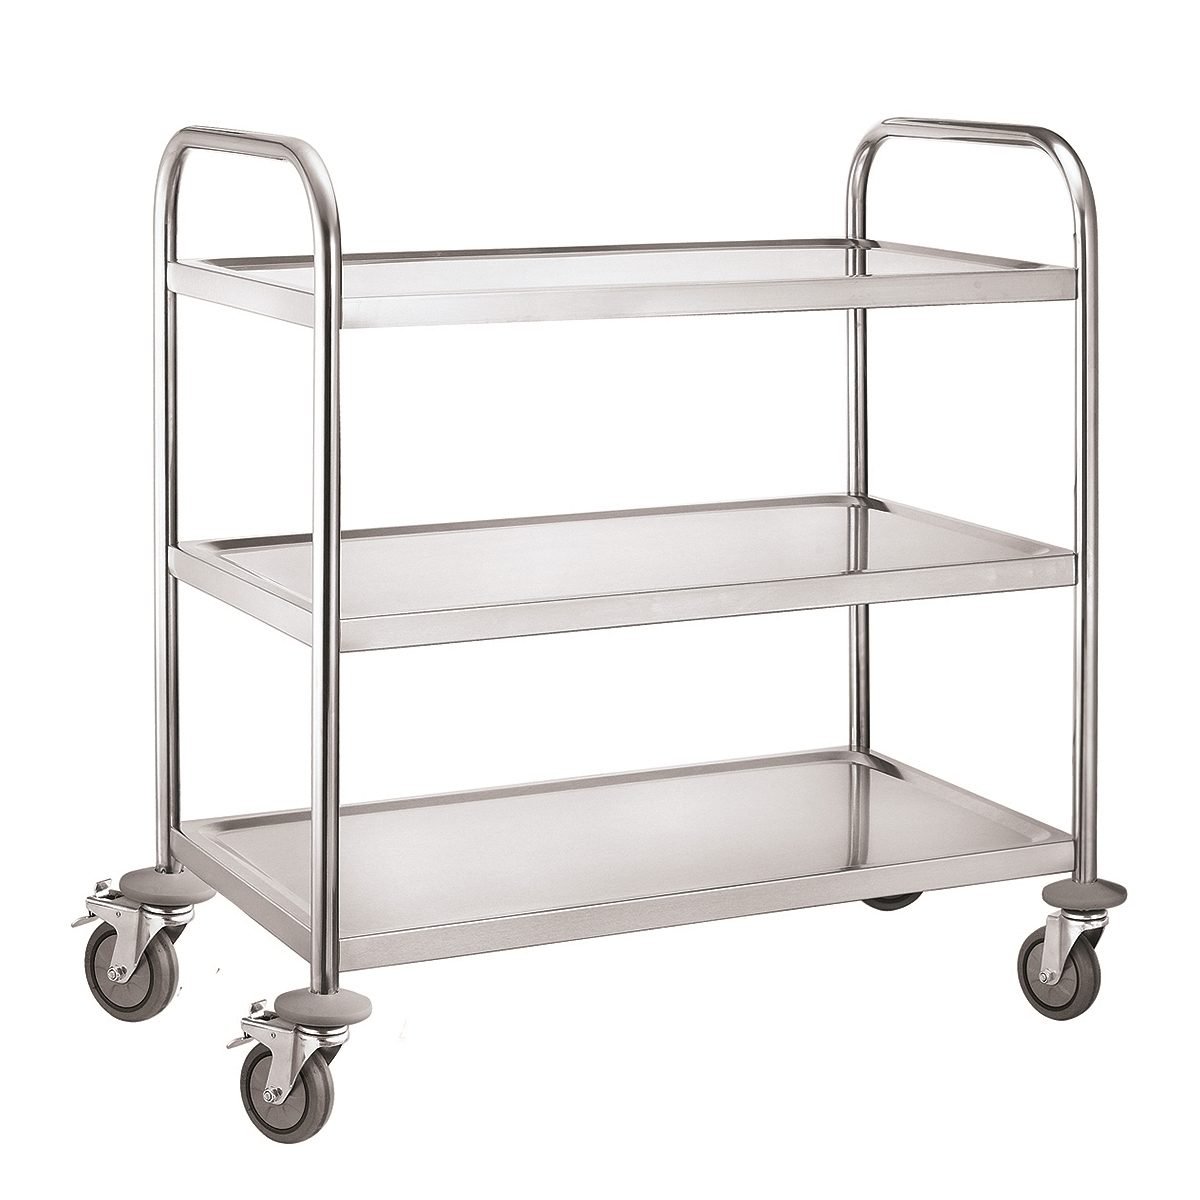 New Imettos 301004 3 Tier Service Trolley For Sale